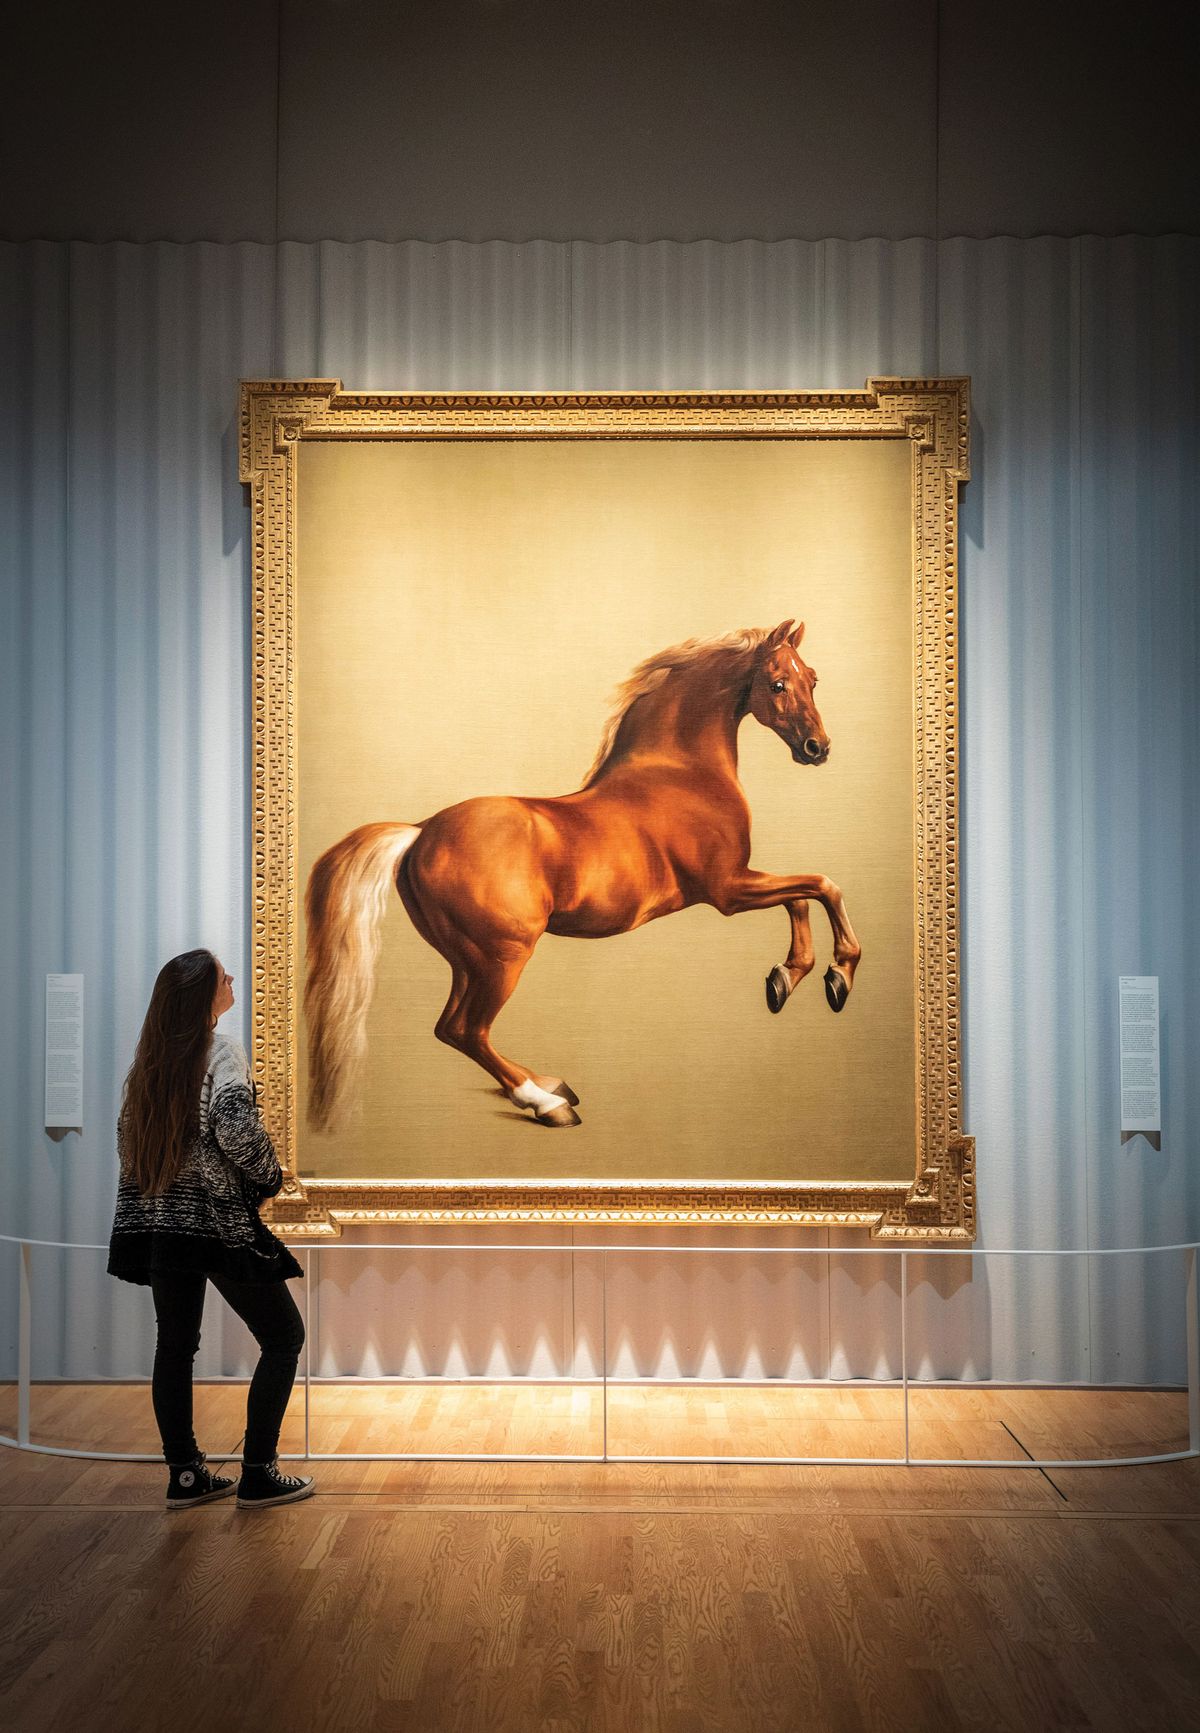 Whistlejacket (around 1762), George Stubbs's life-sized portrait of a racehorse, is currently on loan from London's National Gallery to the Mauritshuis in The Hague Photo: Ivo Hoekstra, Mauritshuis